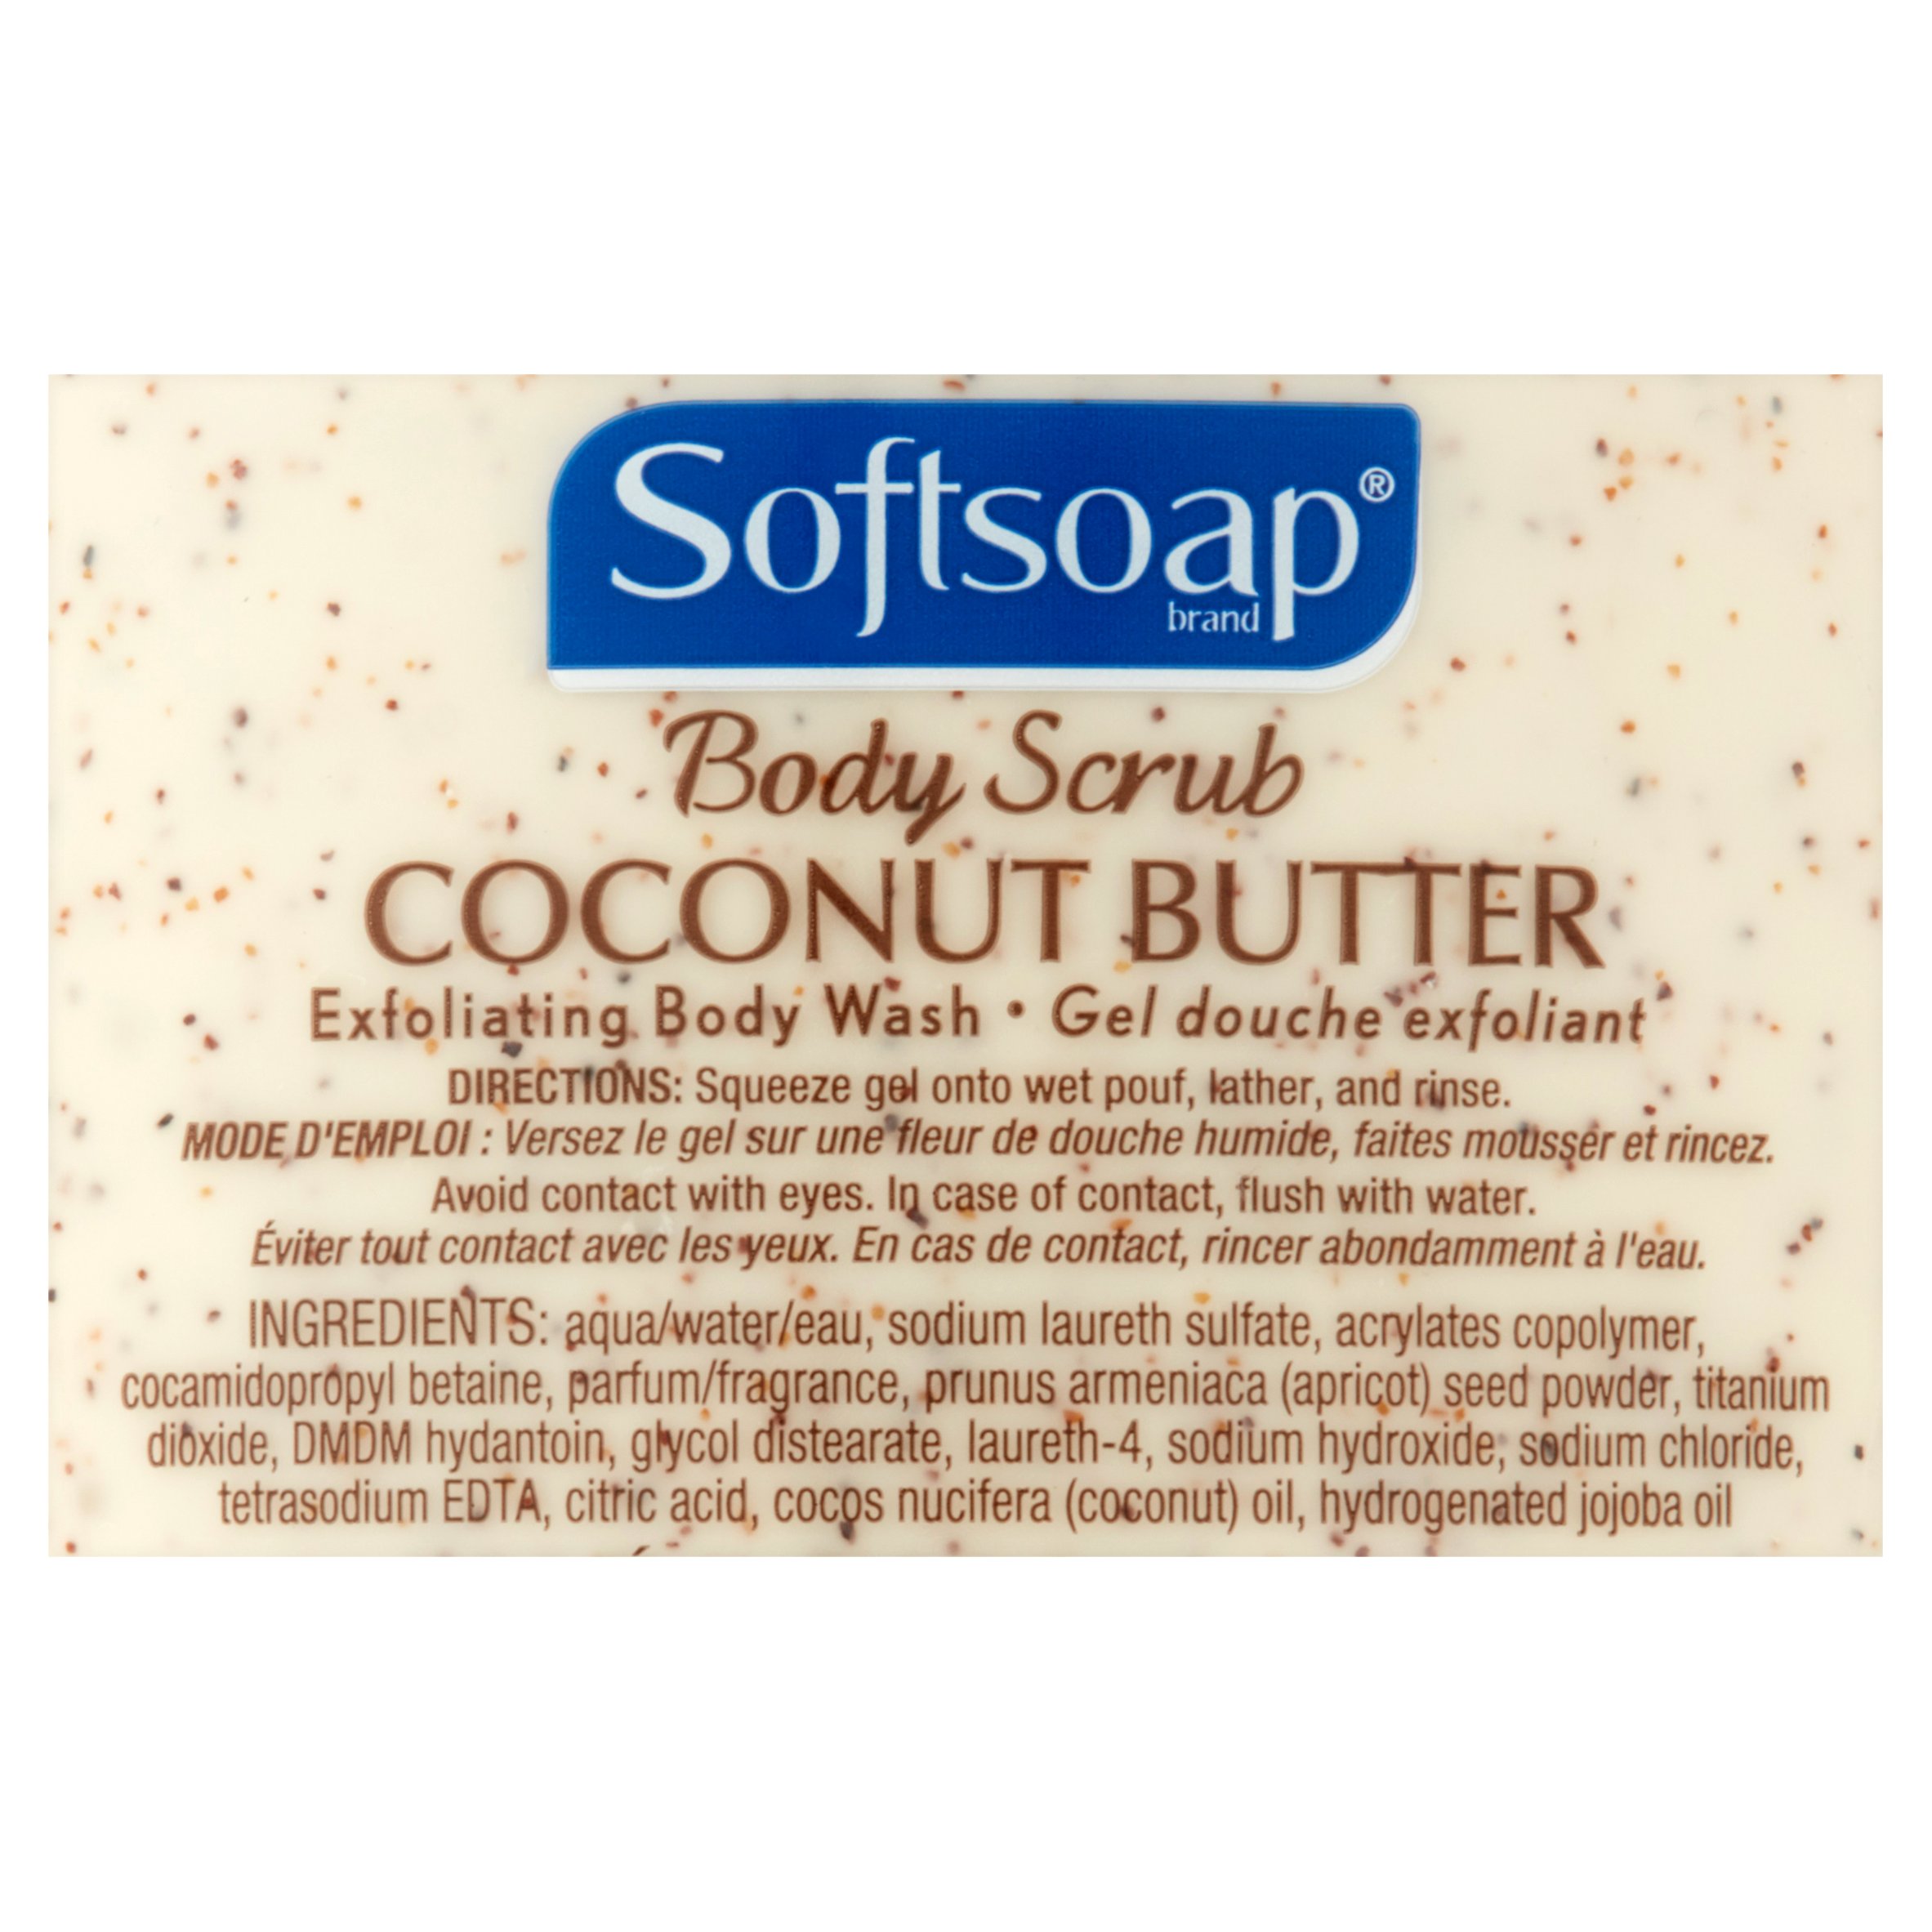 Softsoap, Coconut Butter, Exfoliating Body Wash, 15 Ounce - image 4 of 4